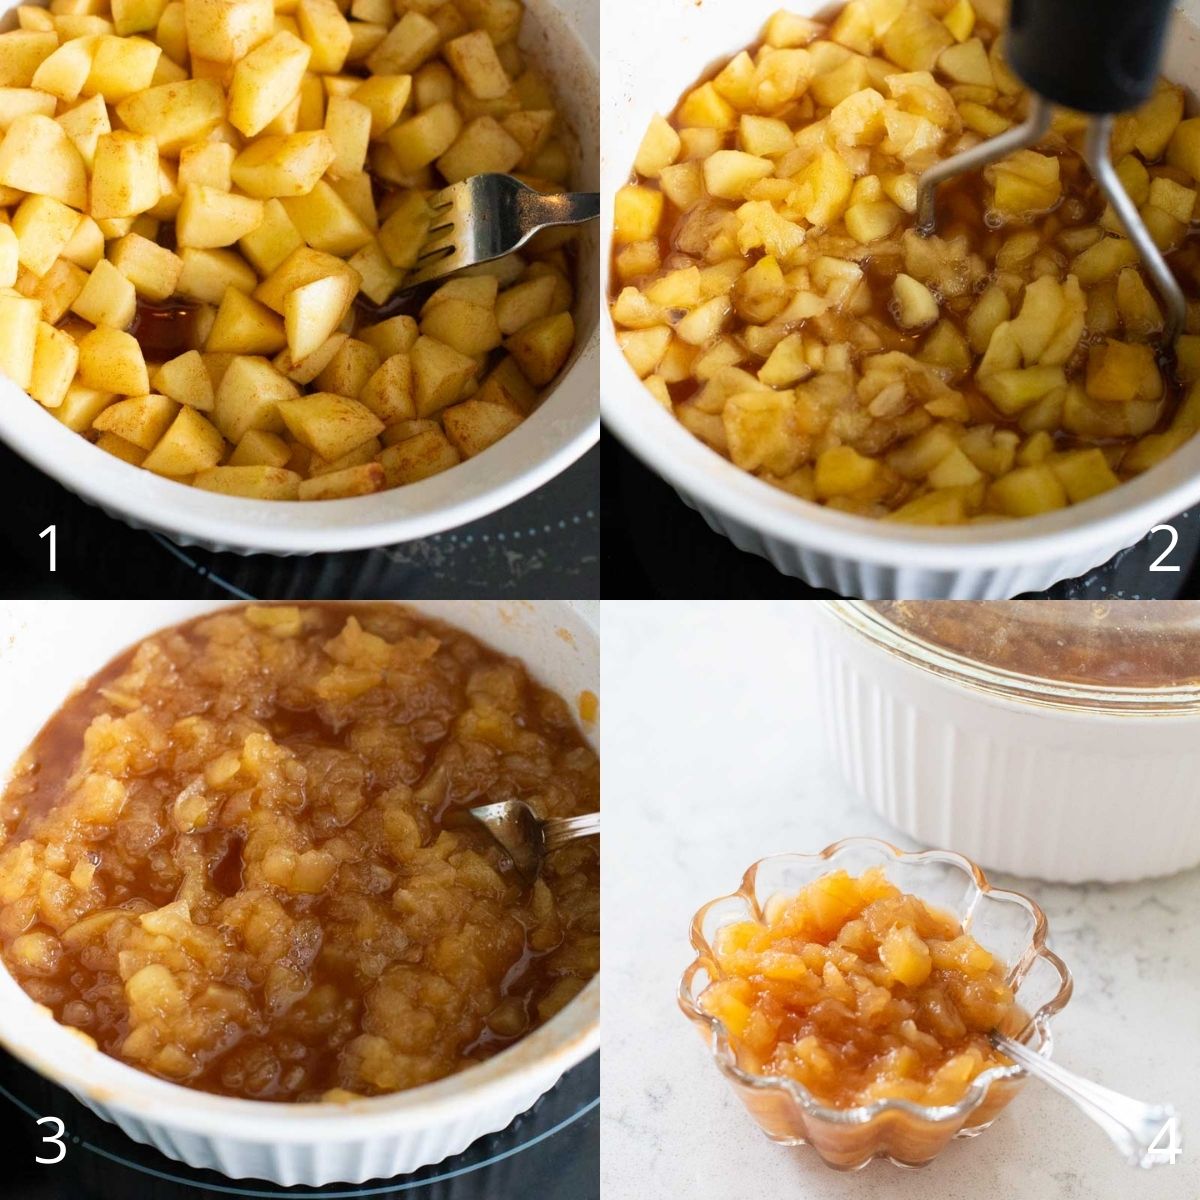 Step by step photos show how to microwave and mash the fresh apples into applesauce.